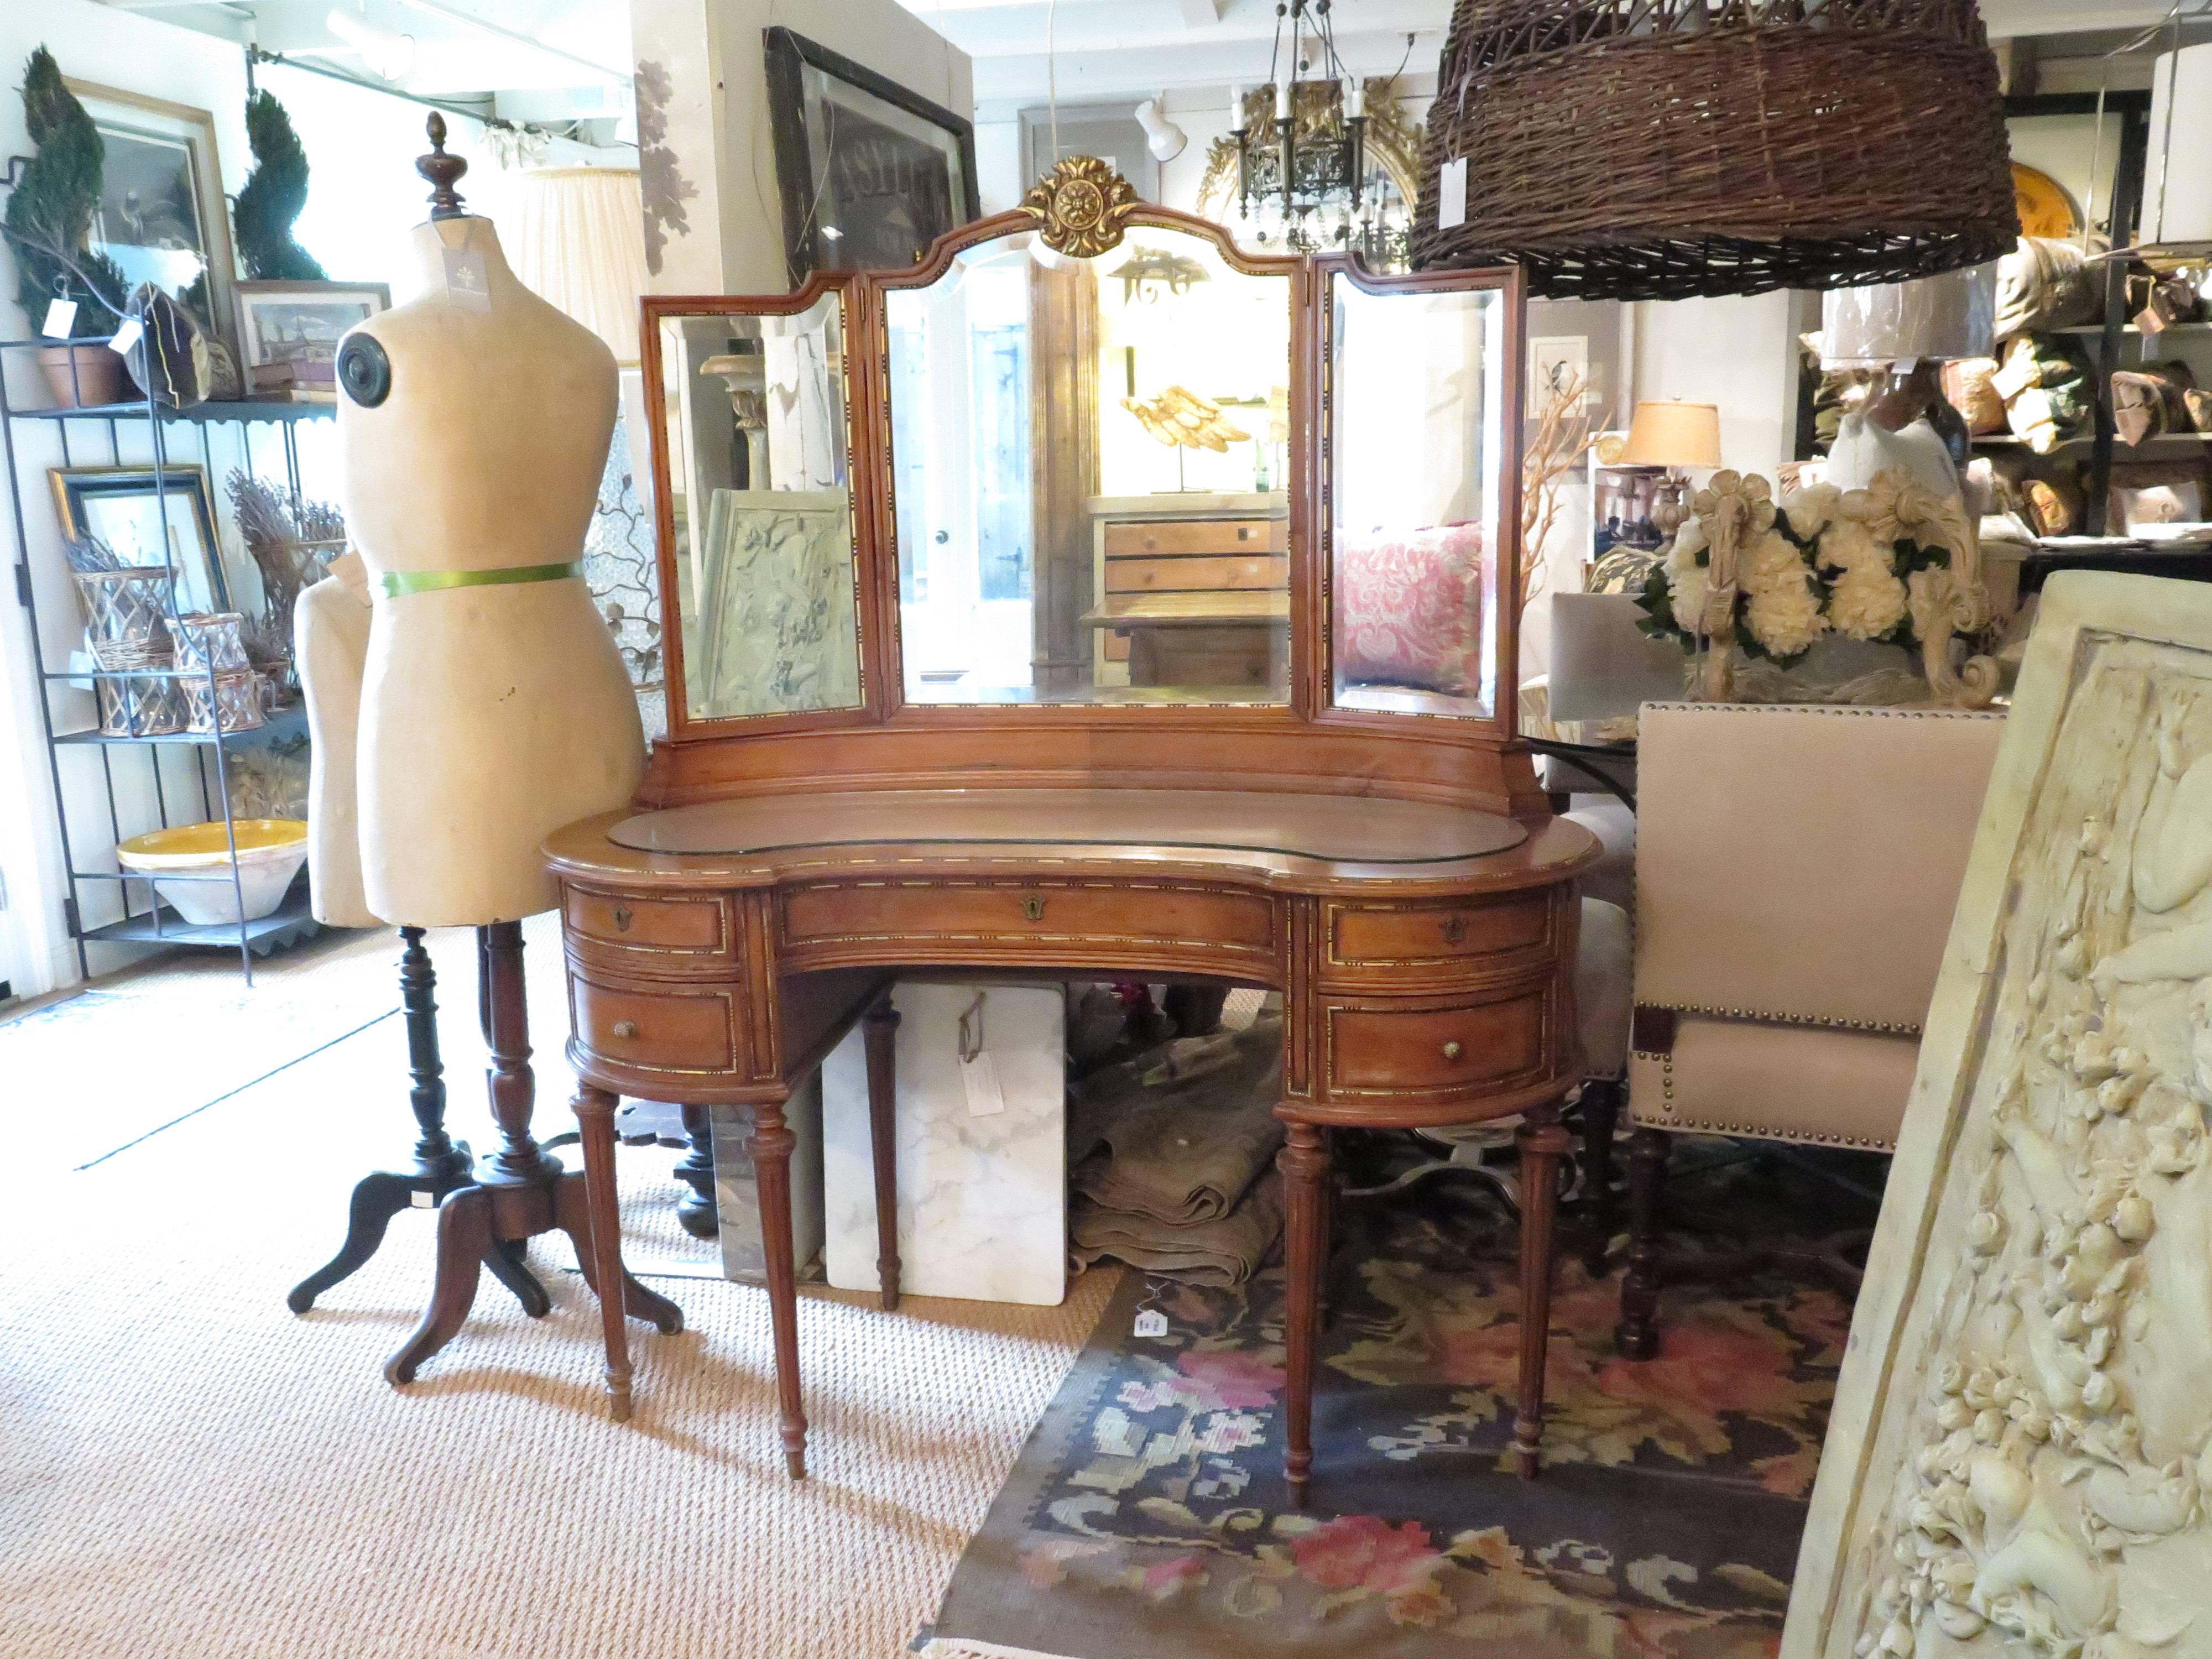 Louis XVI style parcel-gilt vanity with chair and beautiful carved parcel-gilt details in acanthus leaf motif. Table height is 29.5". Chair has minor damage on back caning.